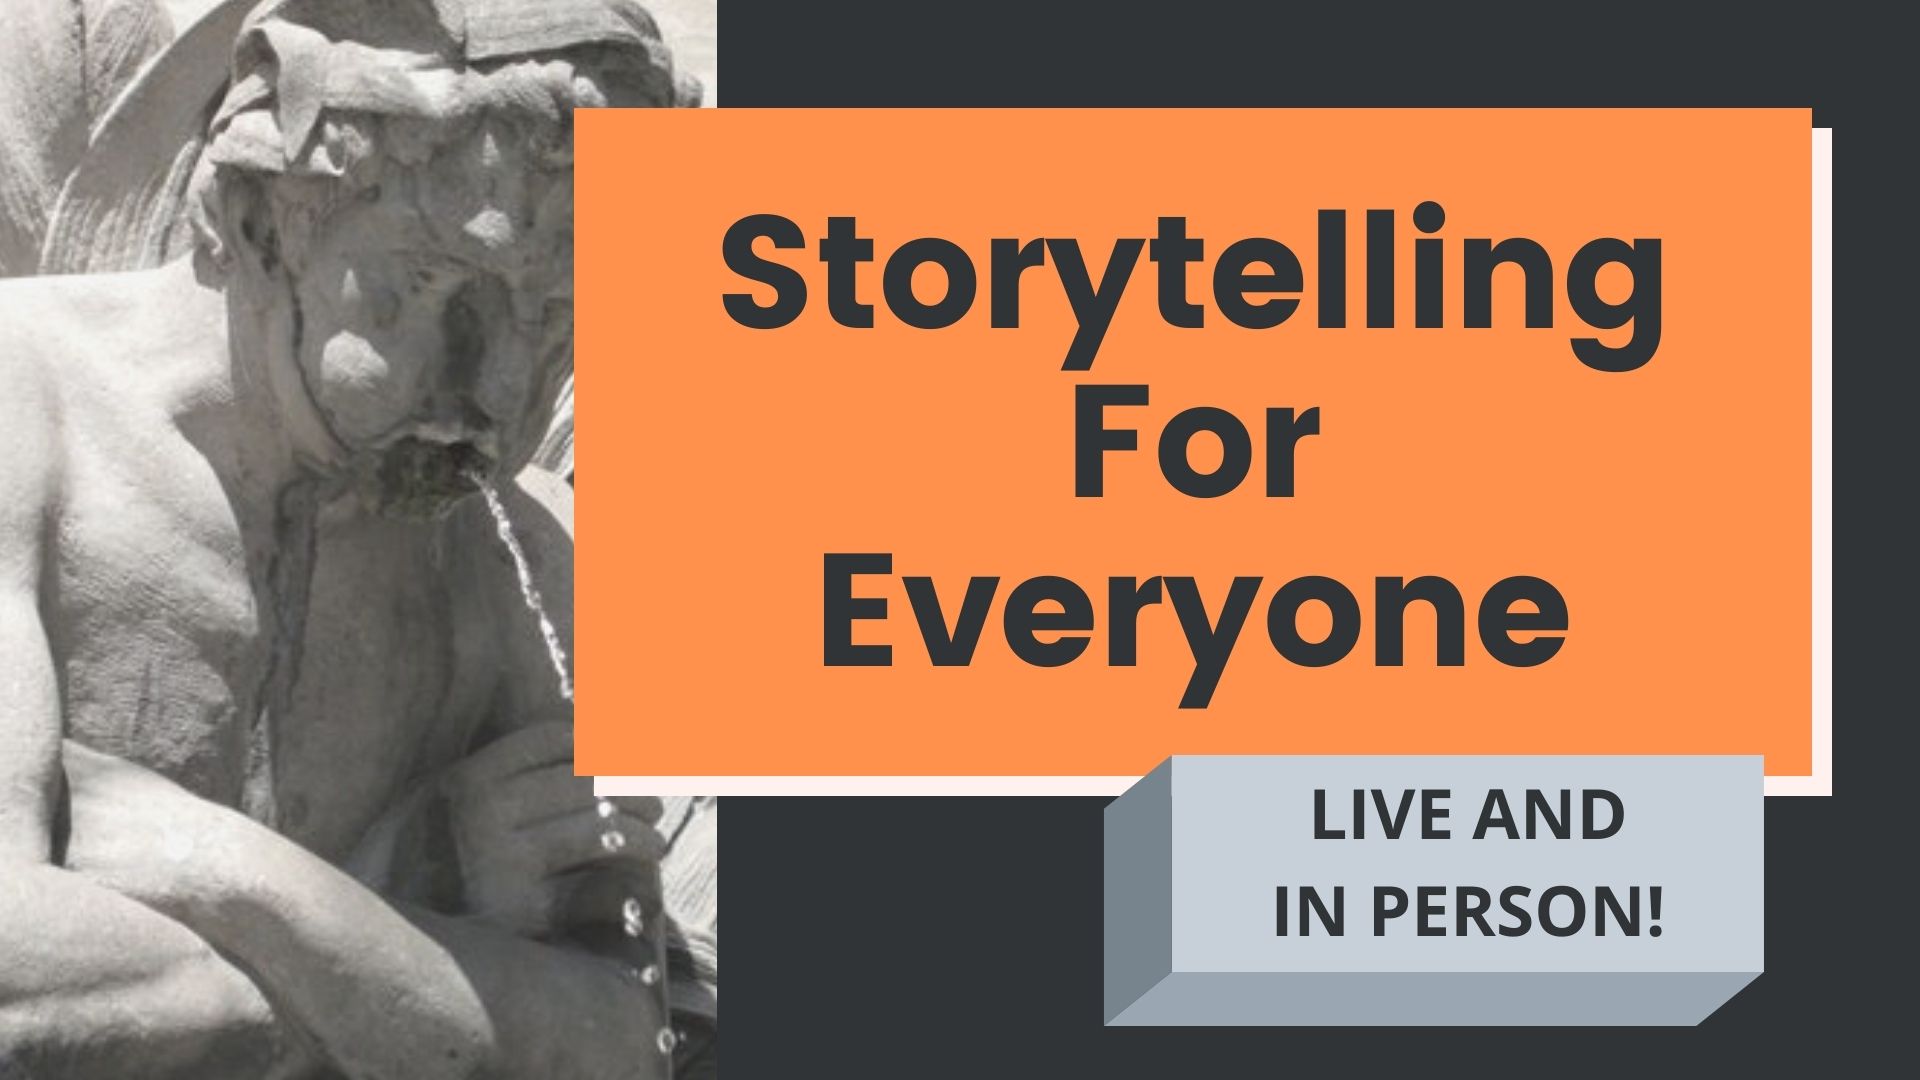 Storytelling For Everyone: Four Week Course in Personal Narrative (Mondays in November)